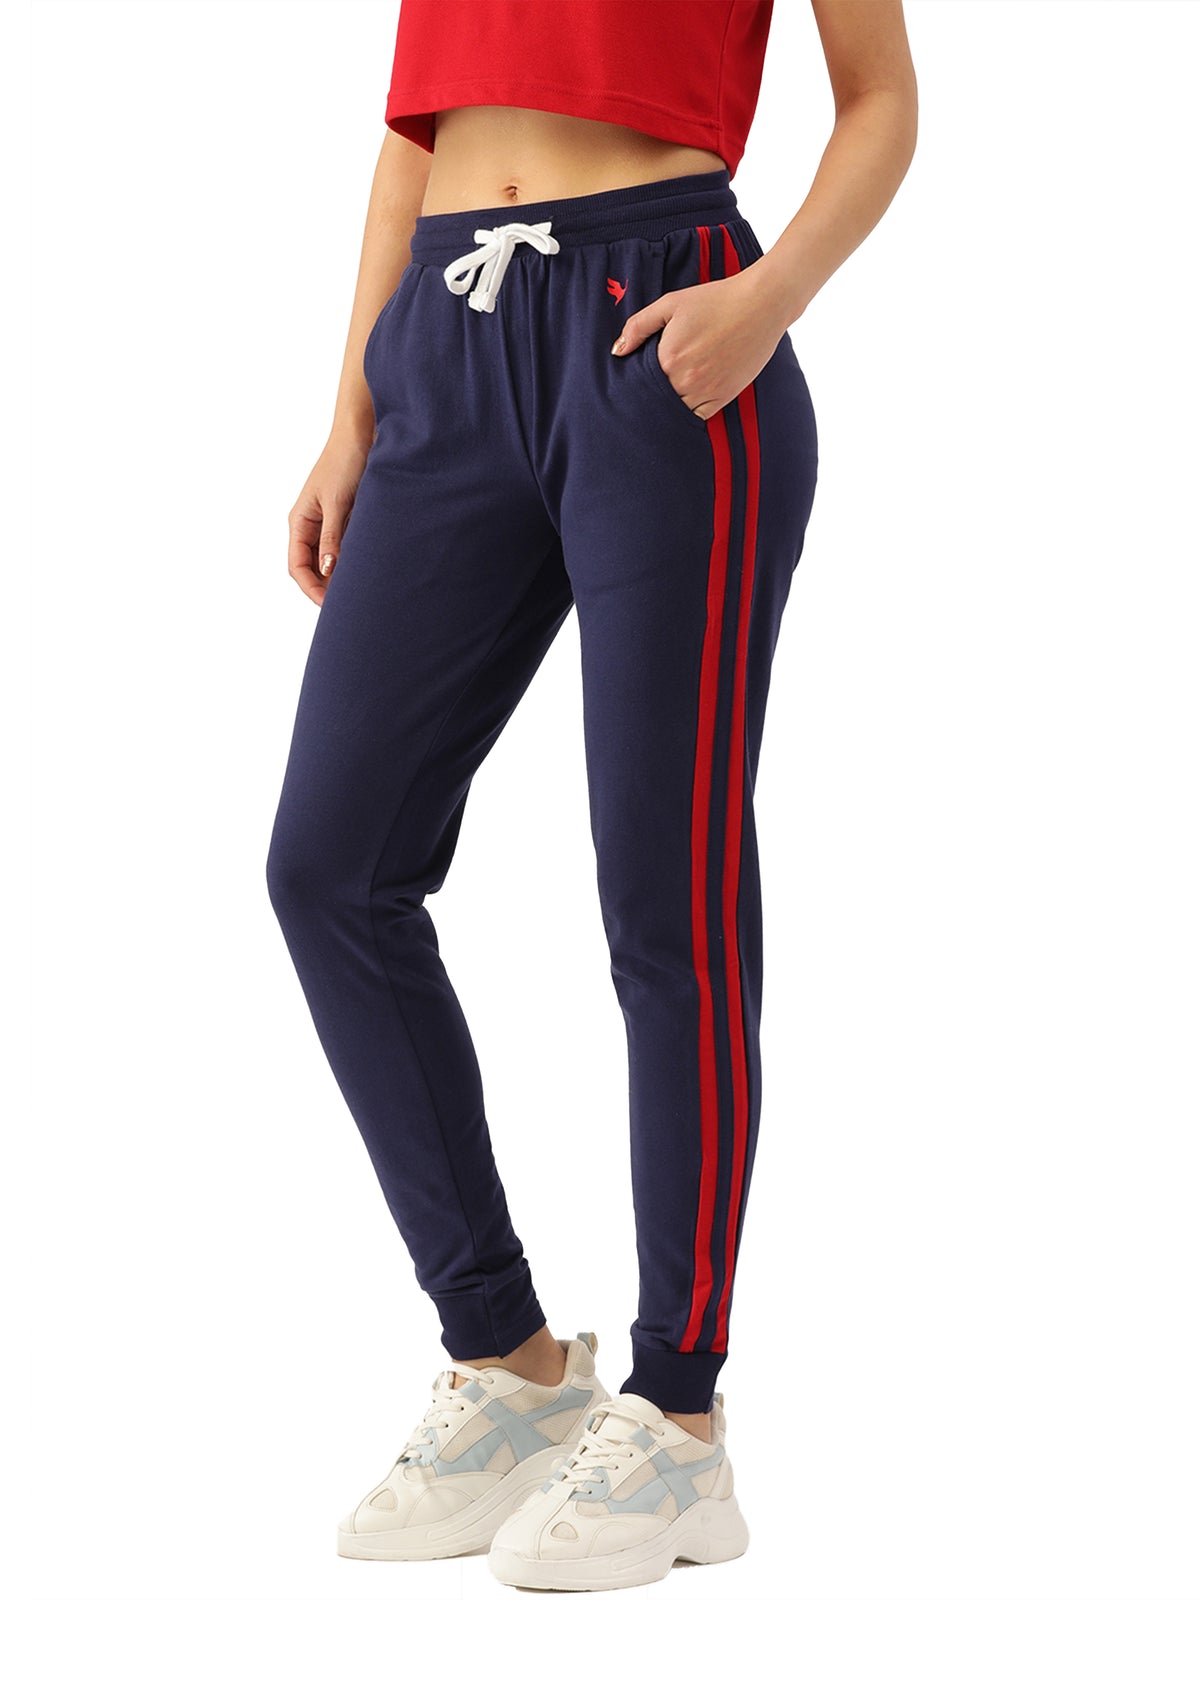 WOMENS COTTON LYCRA SMART FIT SOLID TRACK PANTS